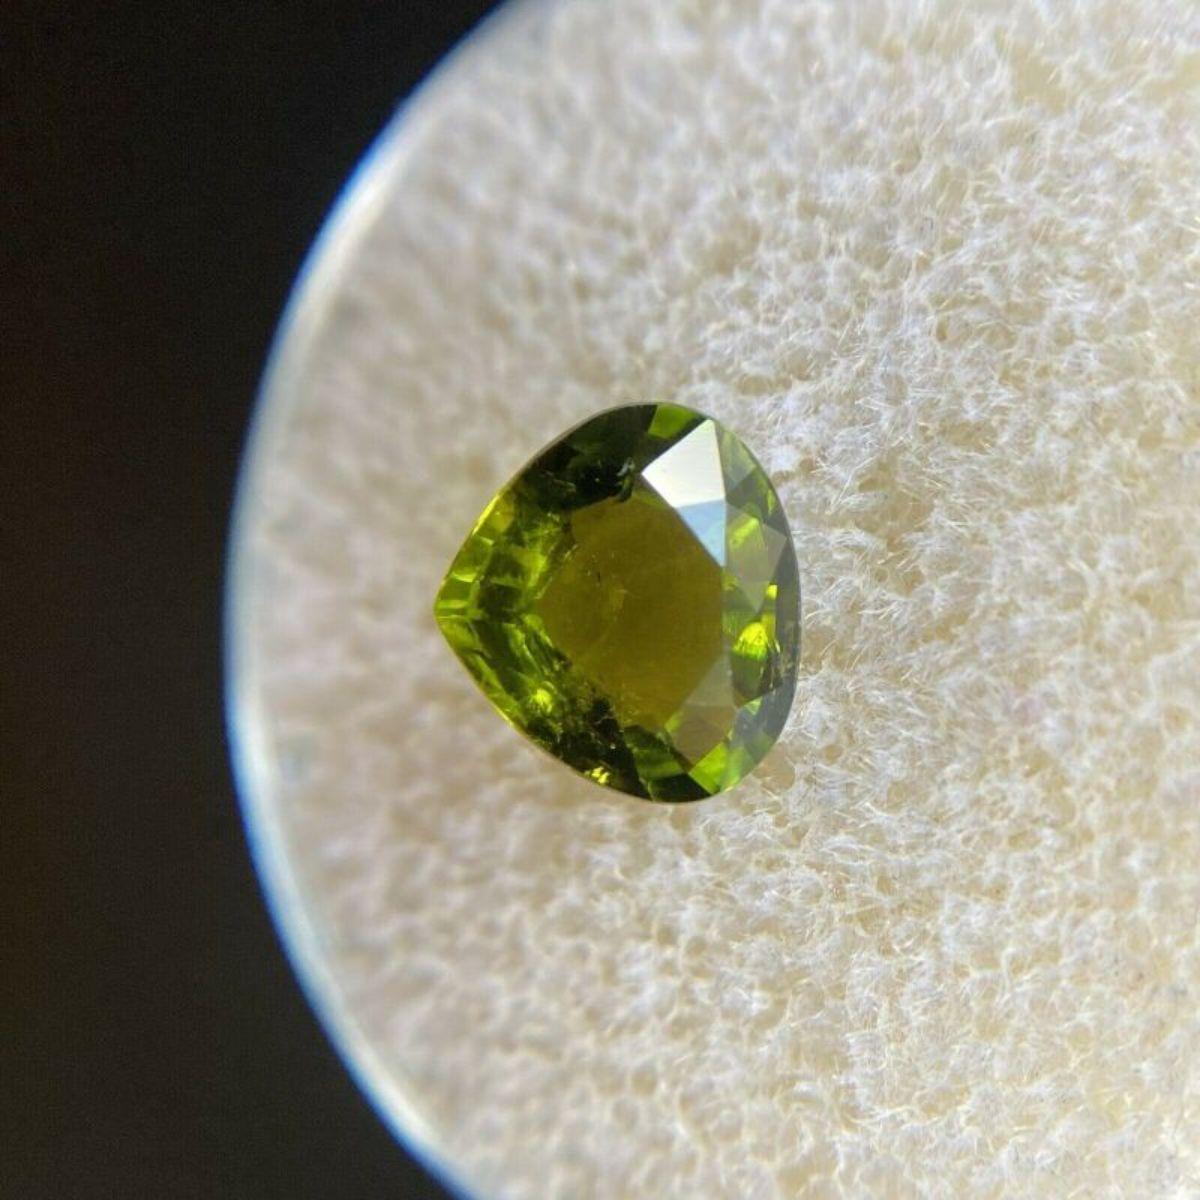 Deep Green Tourmaline 1.38ct Pear Cut Loose Gemstone 8 x 7mm

Natural Deep Green Tourmaline Gemstone. 
1.38 Carat with a beautiful deep green colour and very good clarity, some small natural inclusions visible when looking closely. No breaks or